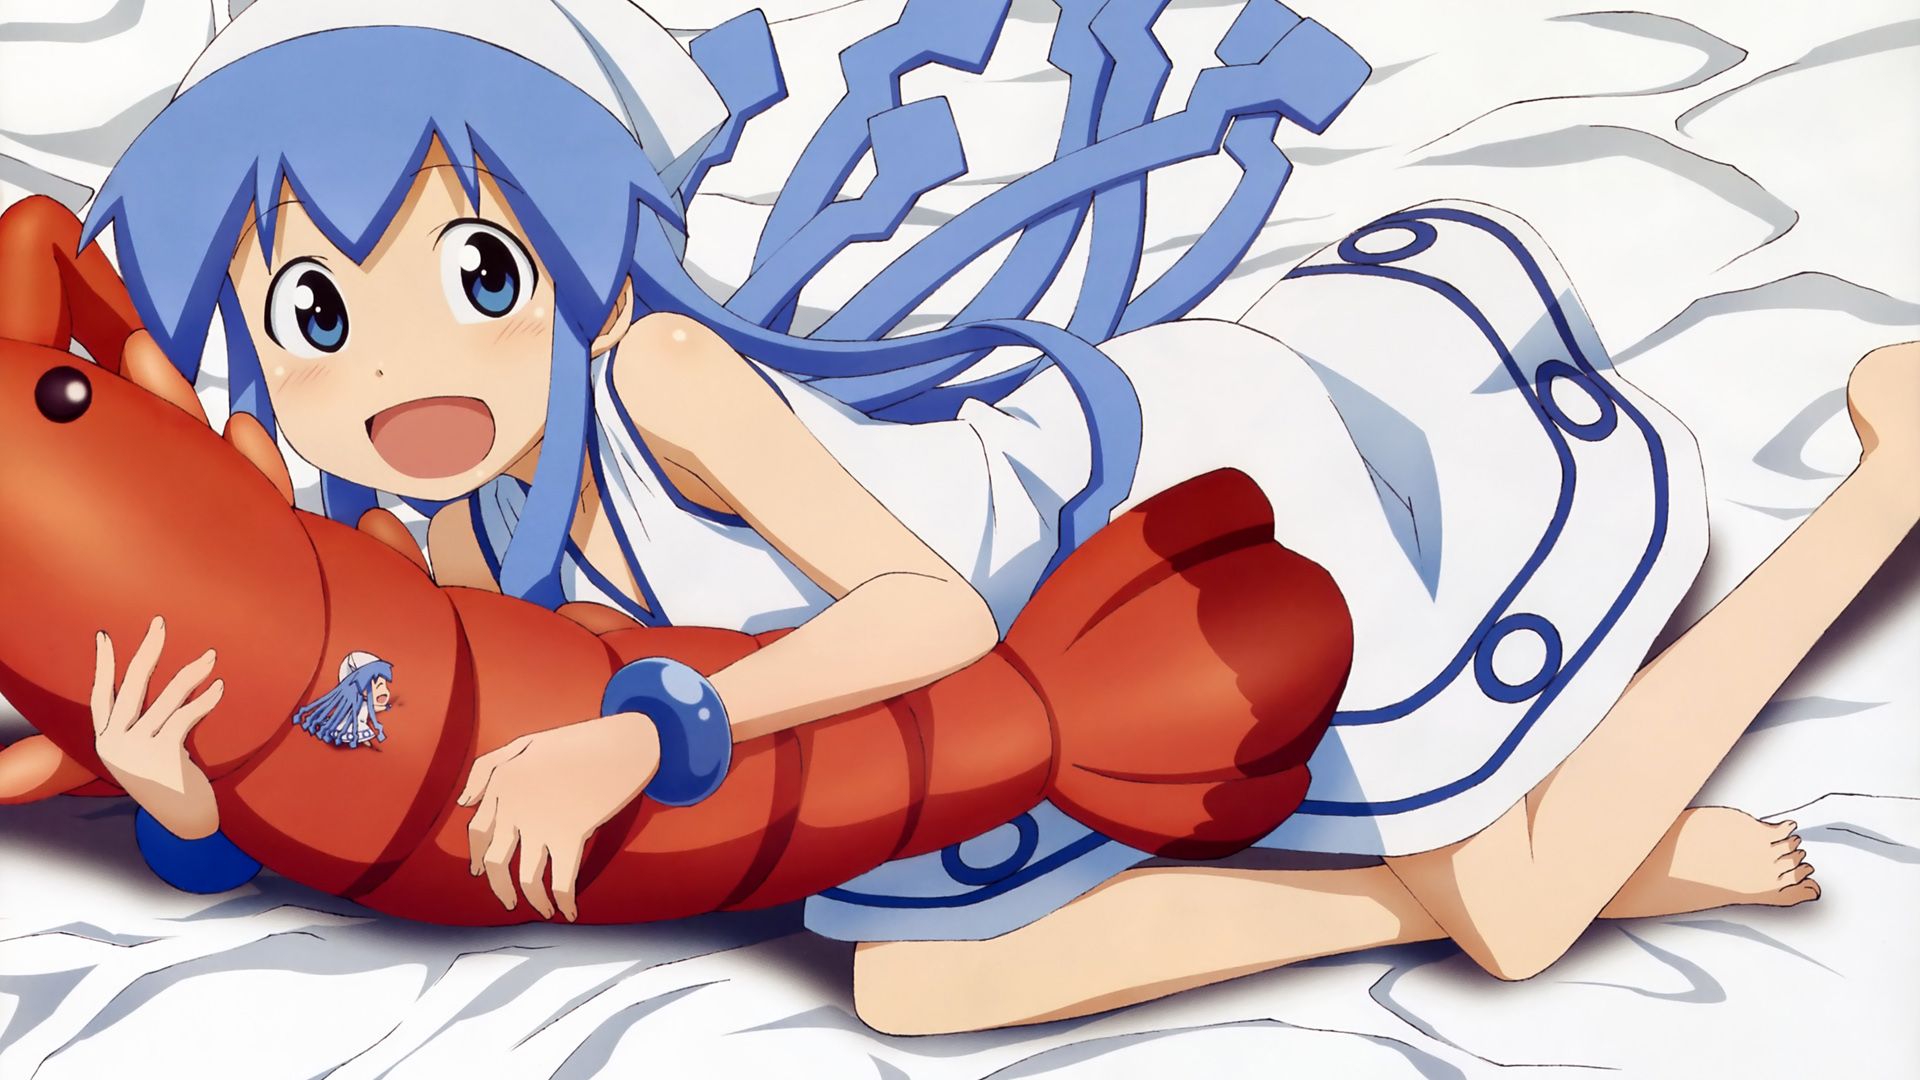 The Squid Girl: The Invader Comes from the Bottom of the Sea! background